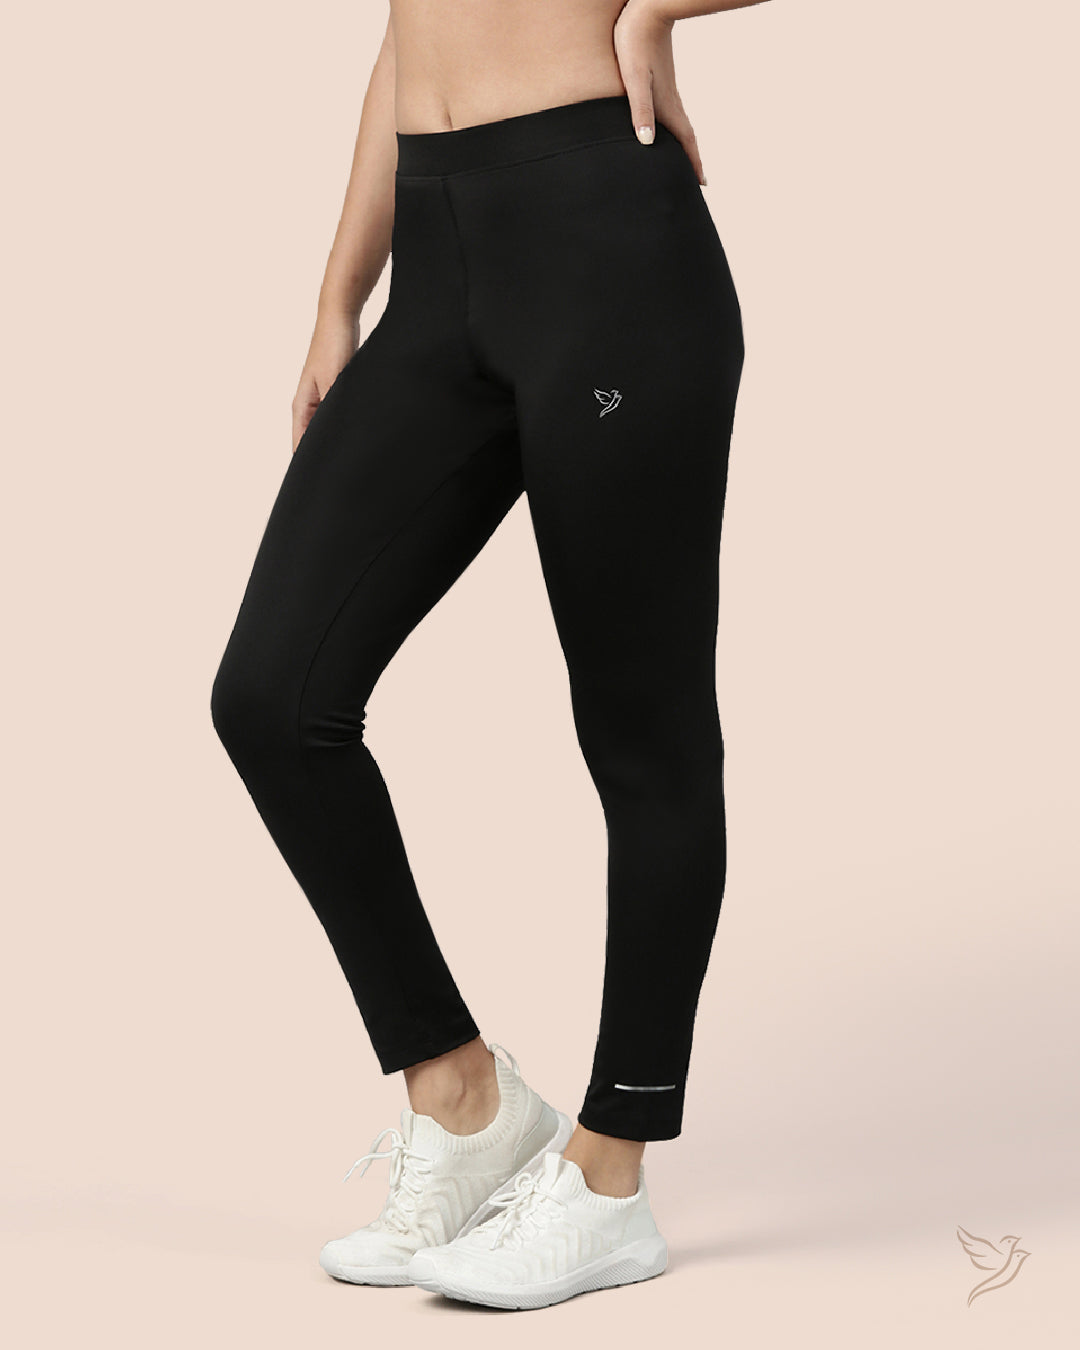 Twin Birds Online - Hit any fitness workout confidently with Twin Birds  mid-waist performance legging. Shop our newest performance wear collections  @ www.twinbirds.co.in #active #activewear #activewearfashion  #activewearforwomen #performance